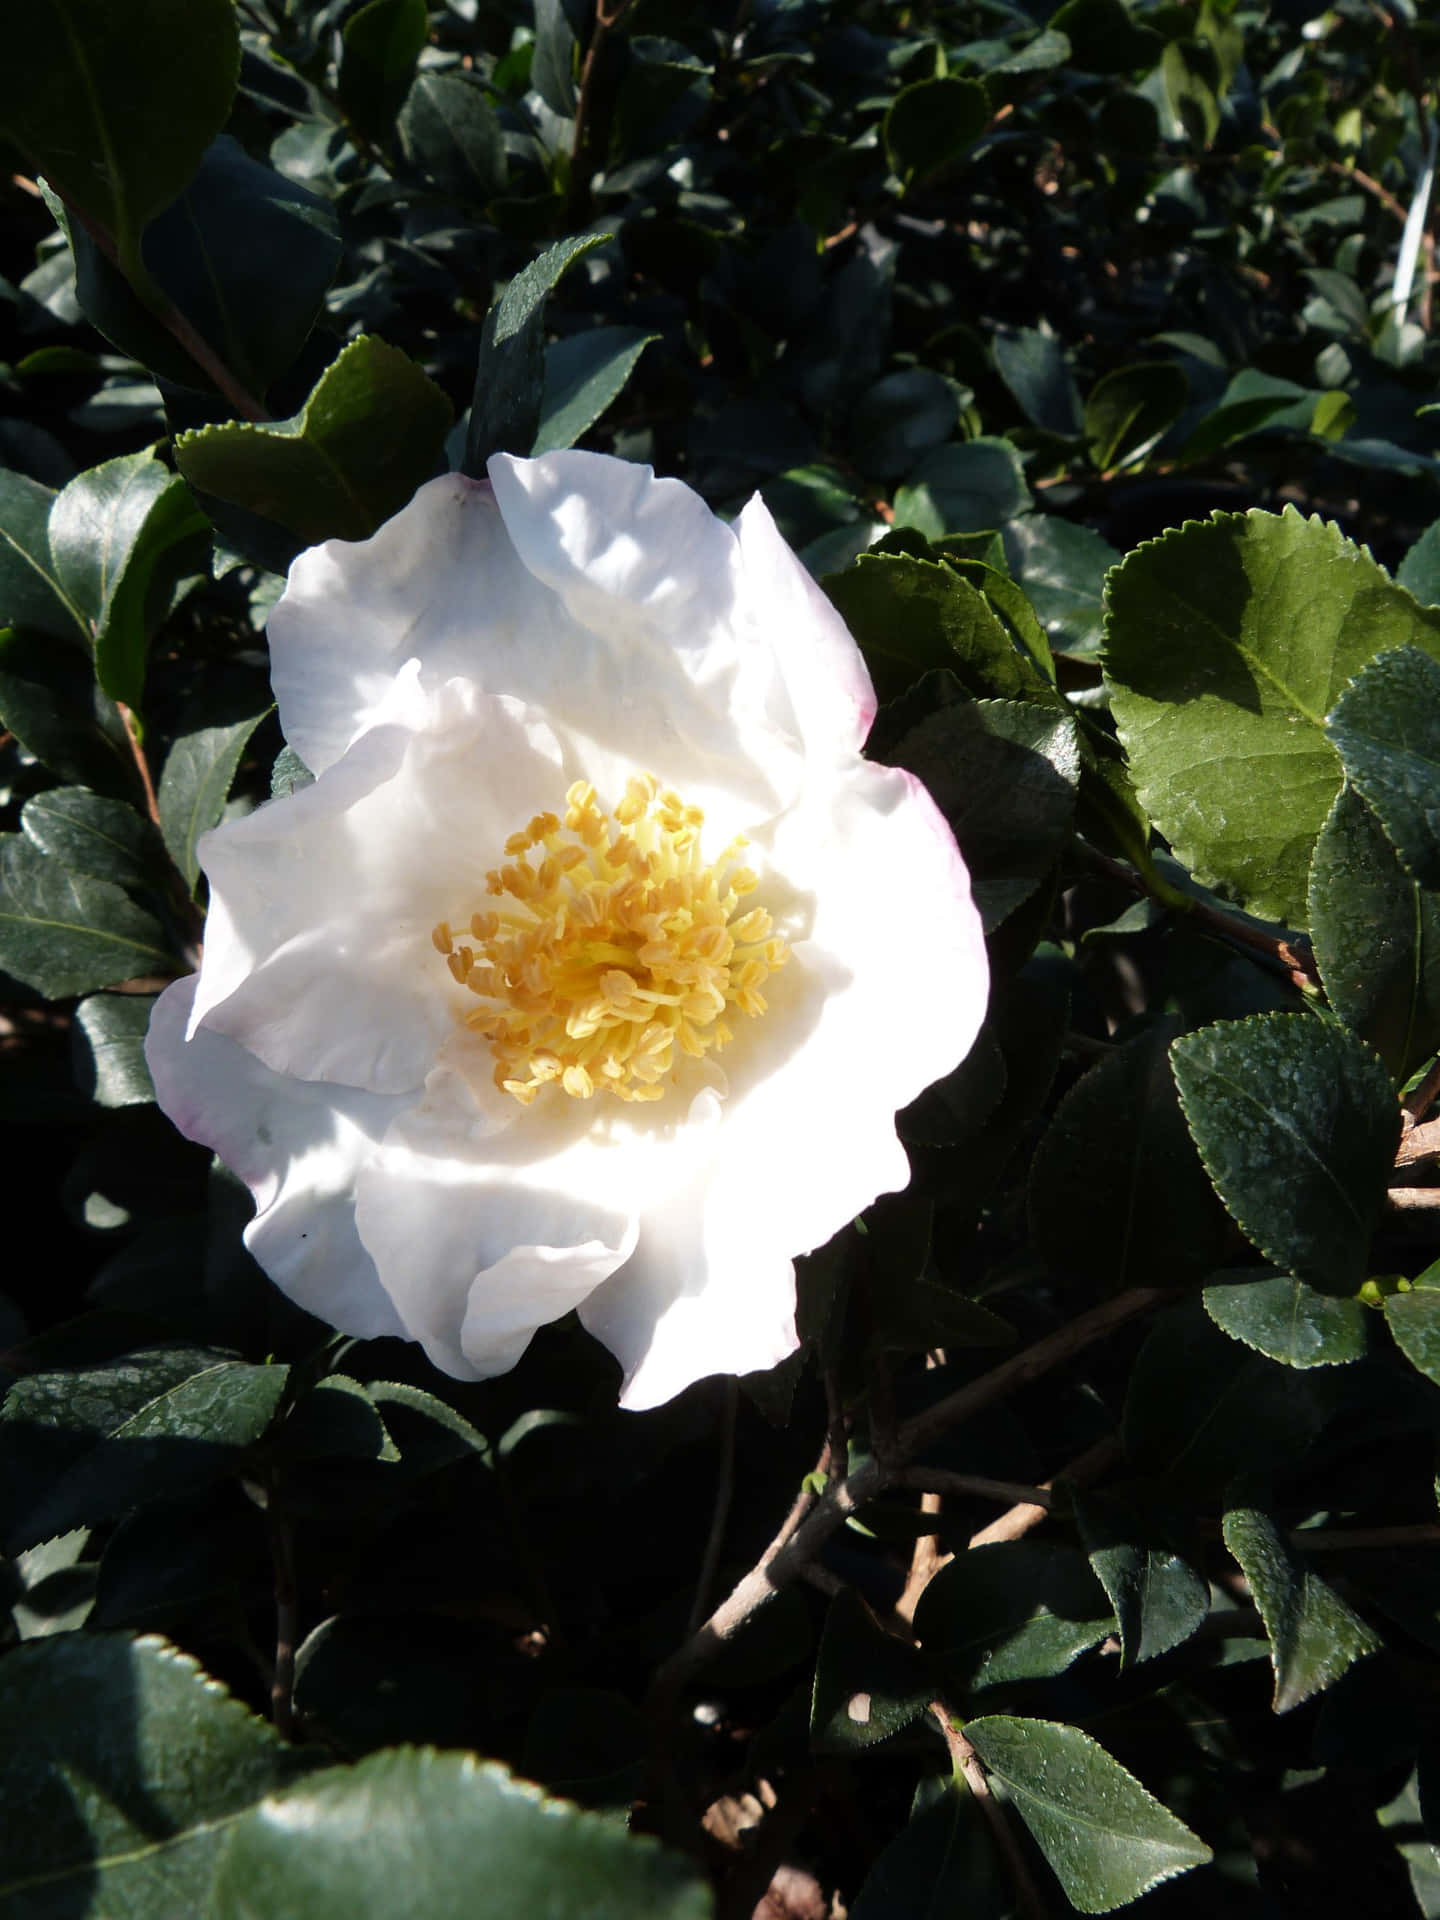 Image  A Blushing Camellia Sasanqua Plant in Full Bloom